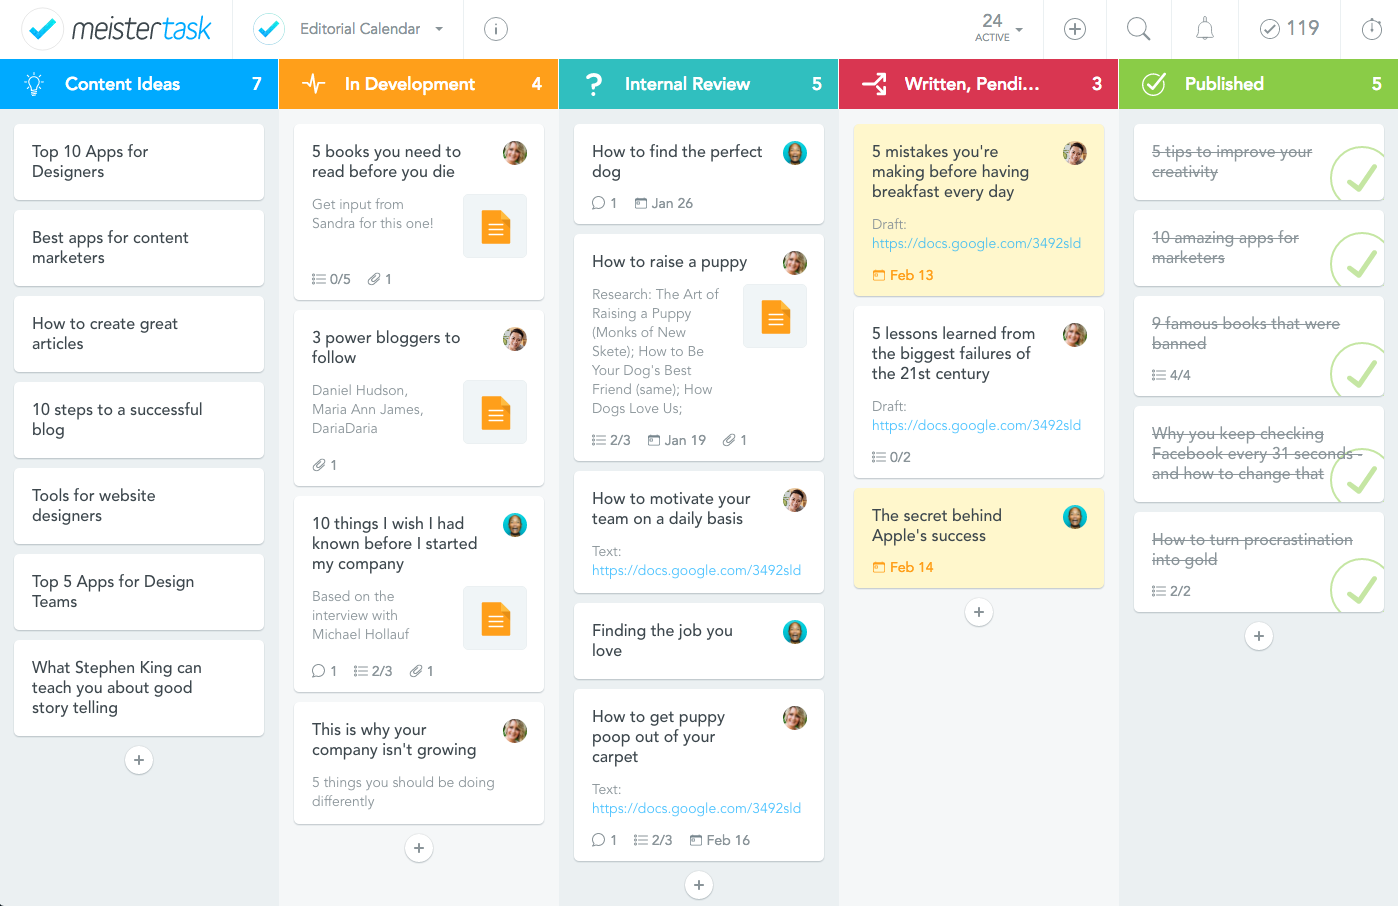 meistertask-editorial-calendar for content planning